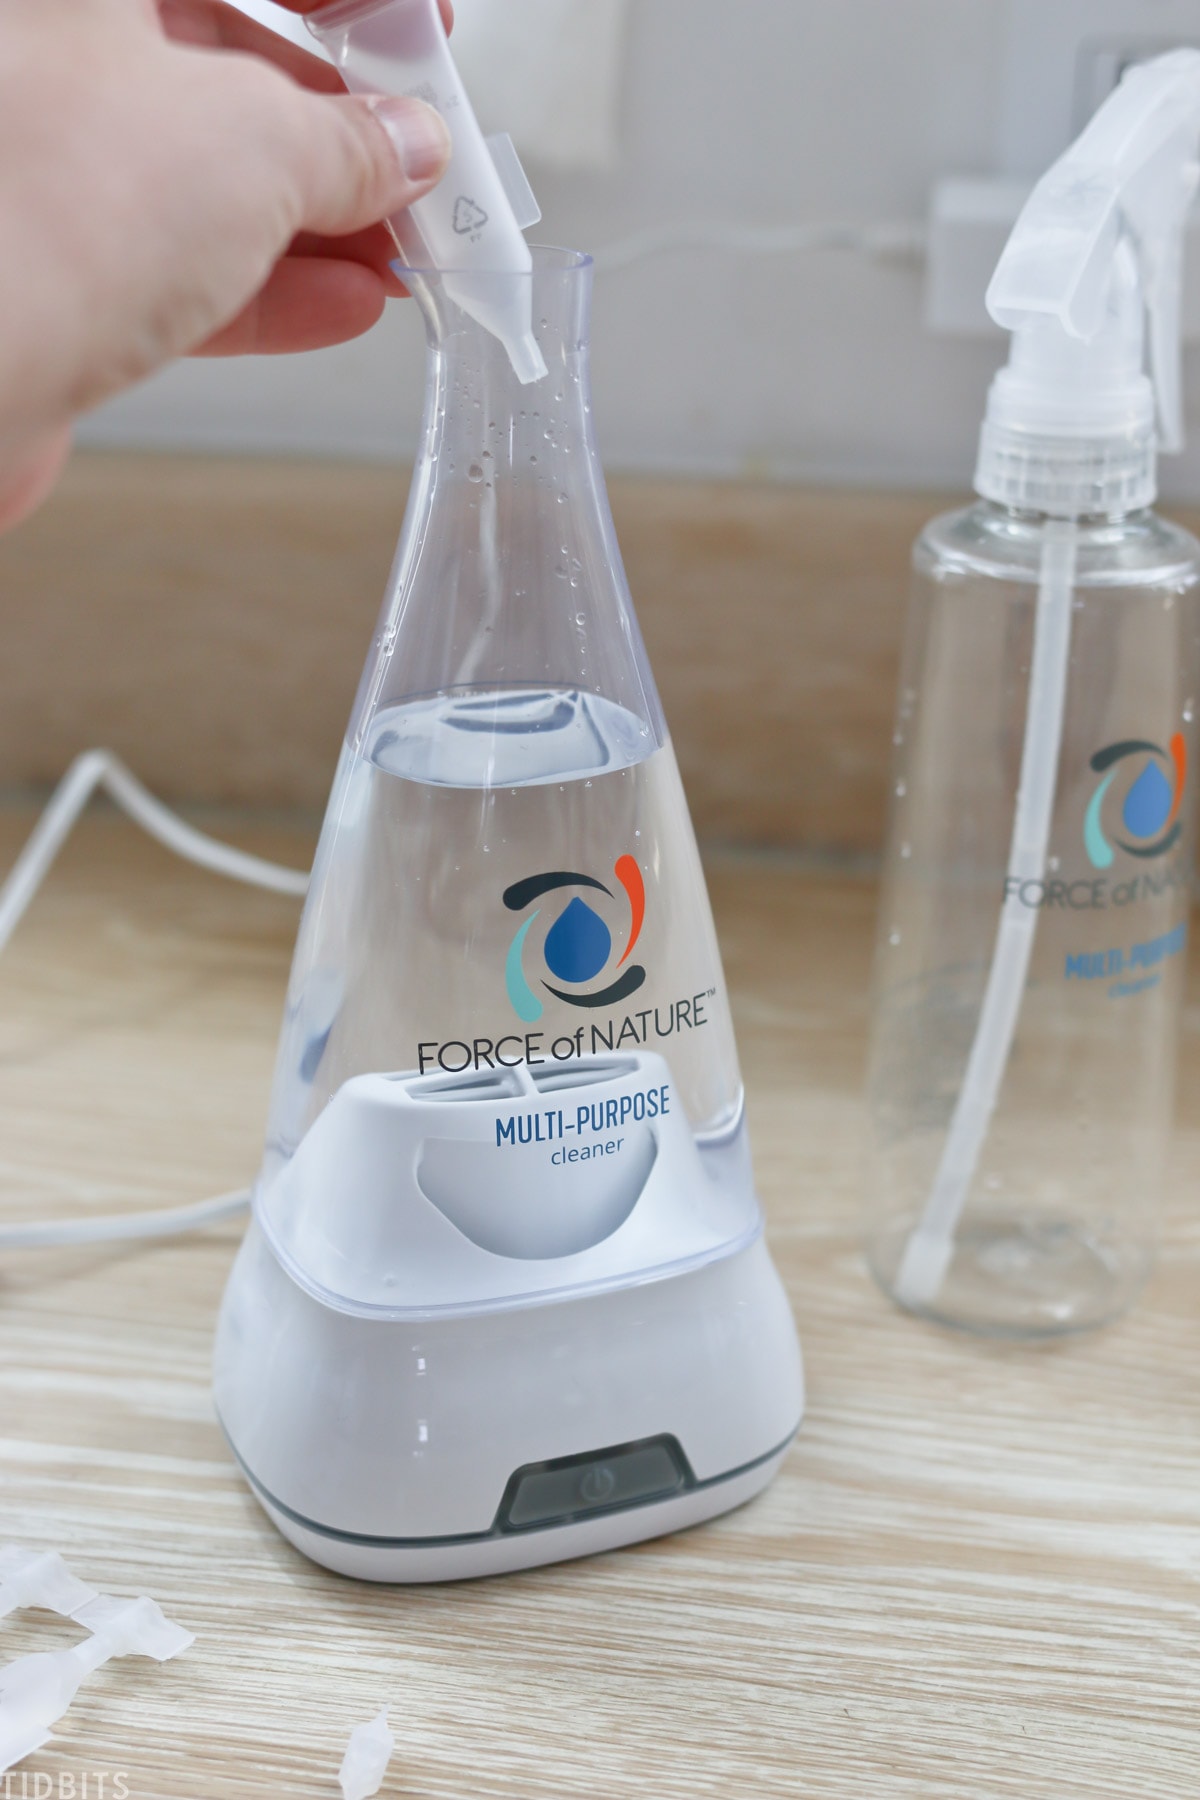 Force of Nature spray bottle and electrifier filled with disinfectant solution